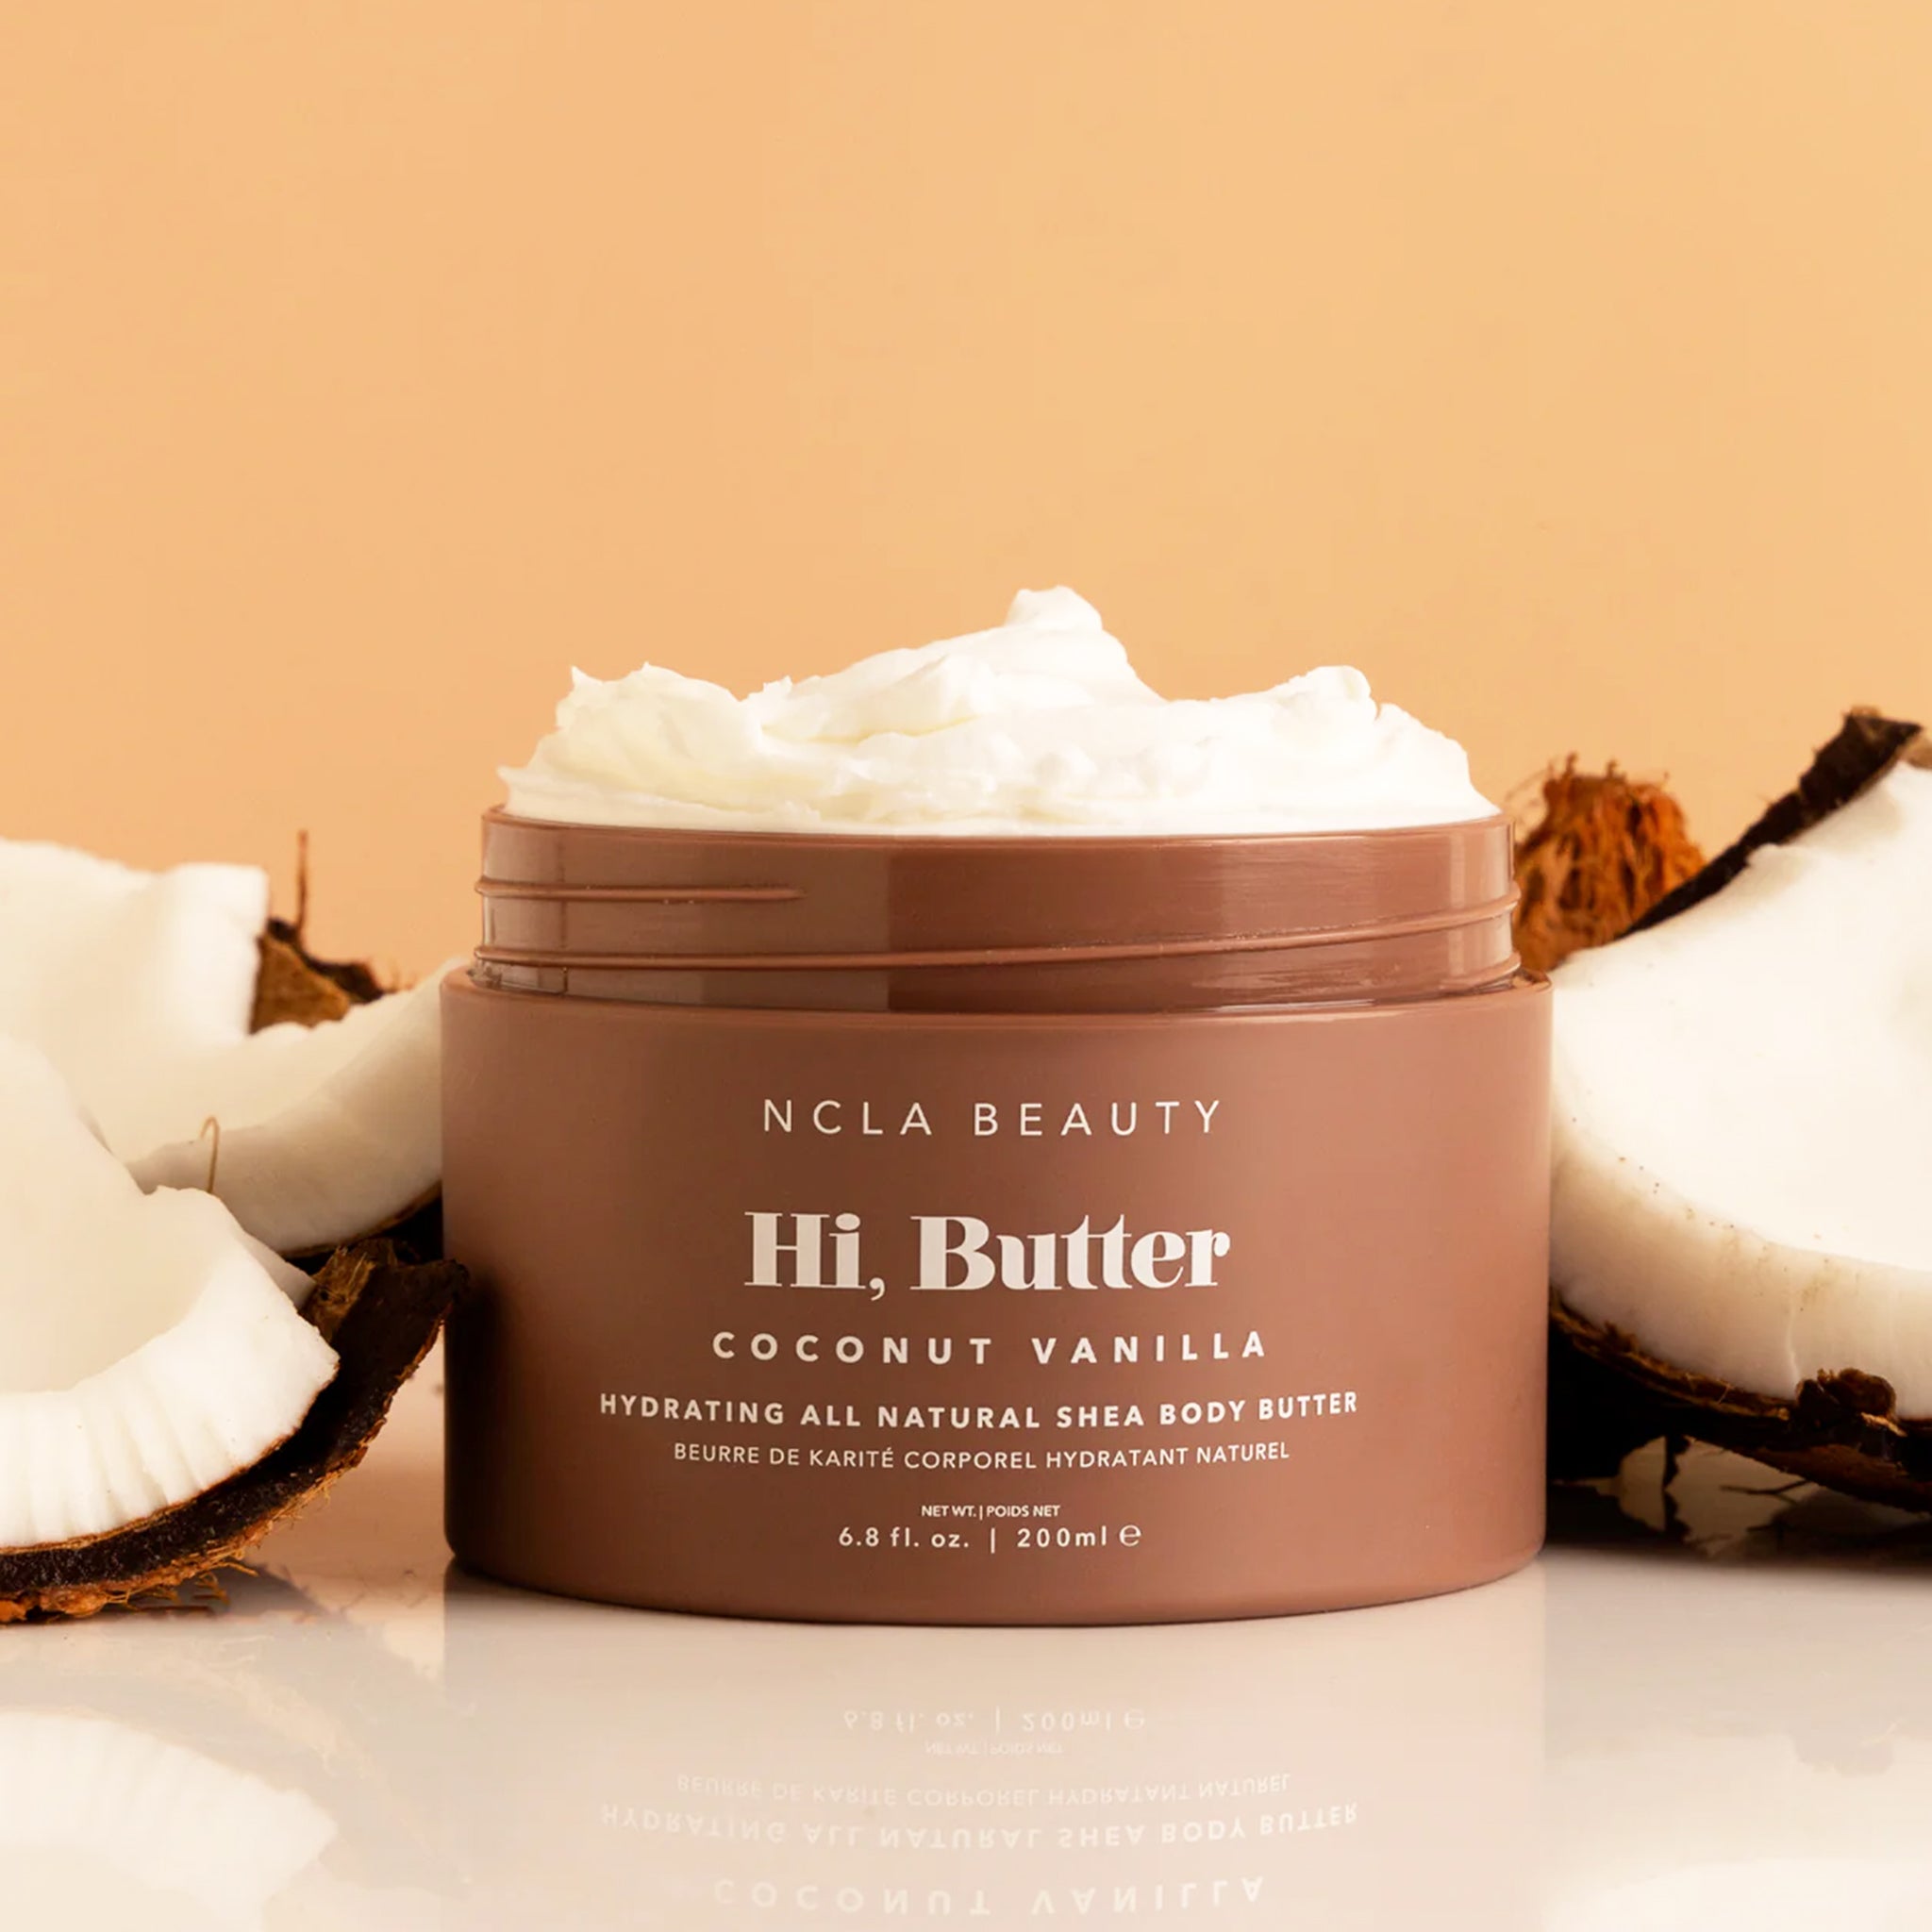 A brown jar of body butter in a coconut vanilla scent.